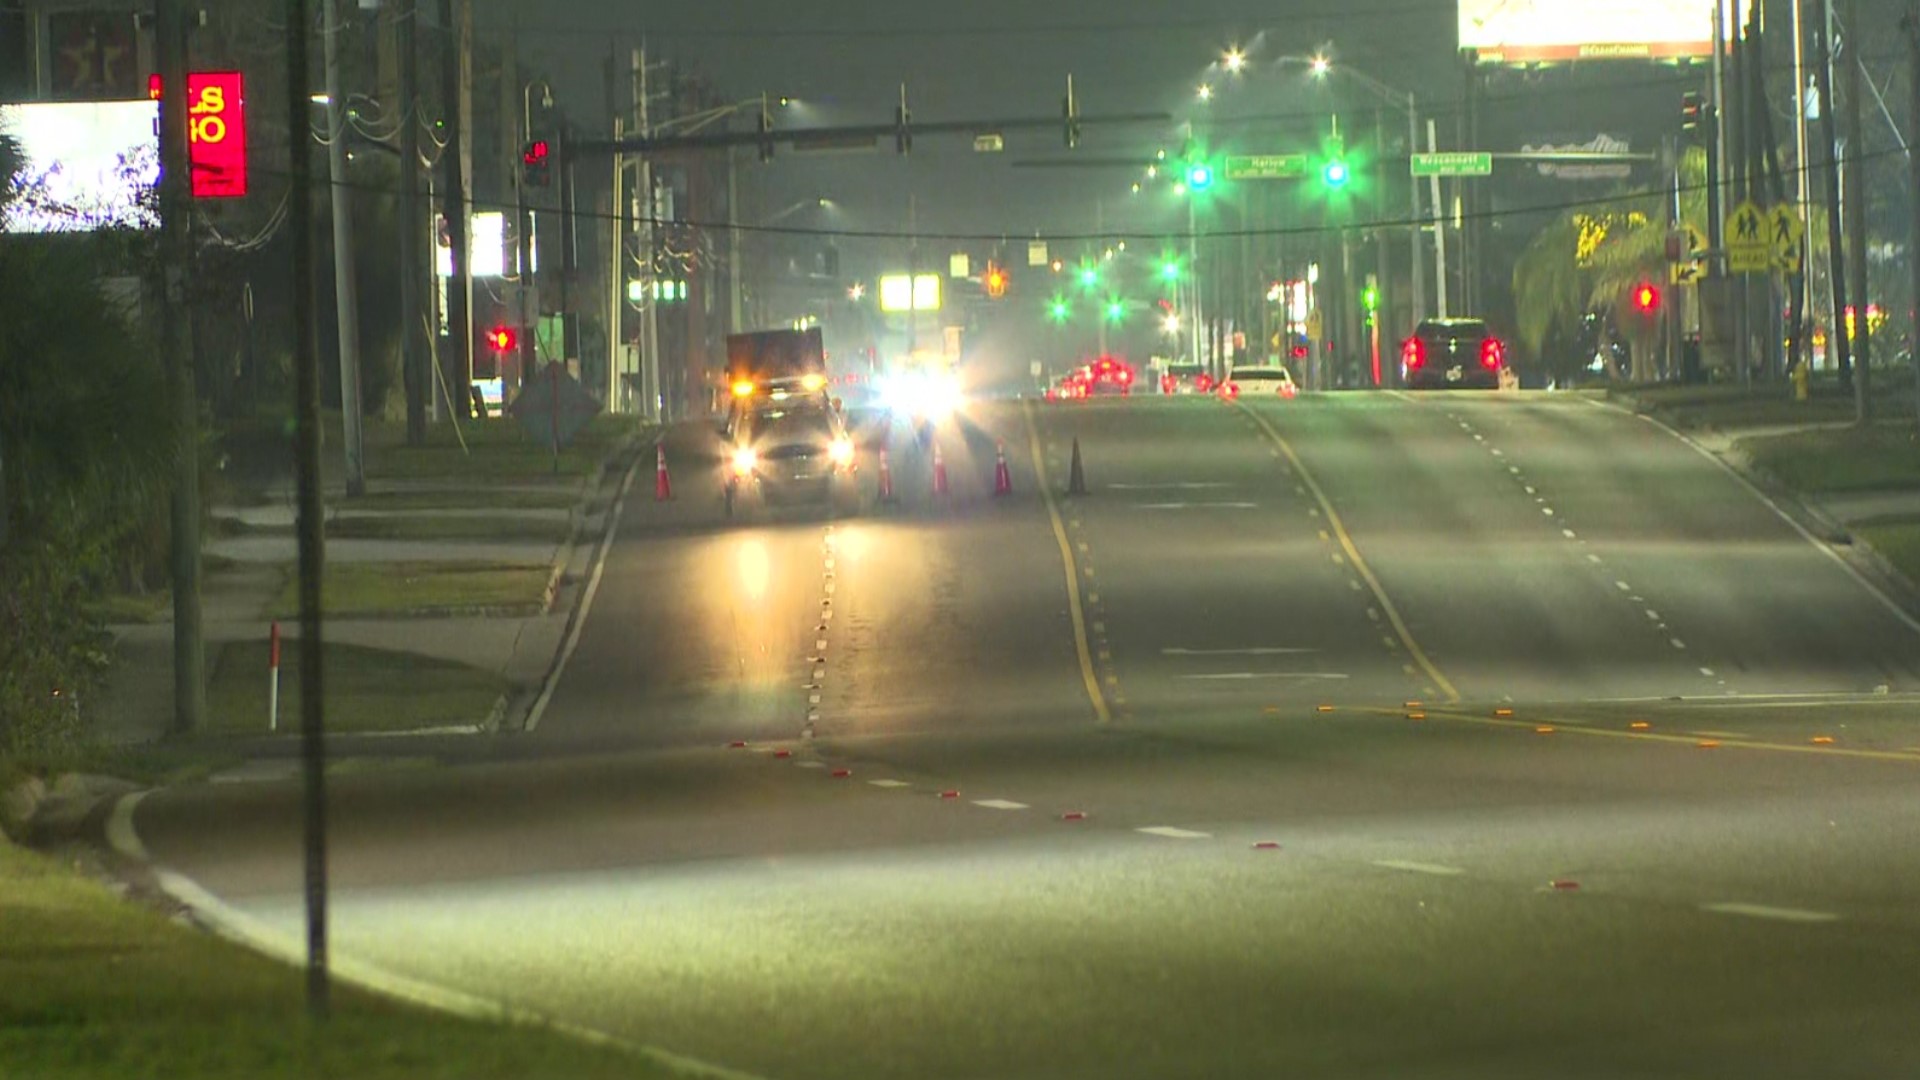 The Jacksonville Sheriff's Office says the man was in his 20s and believe that the hit-and-run vehicle is a Volkswagen based on evidence left at the crash scene.